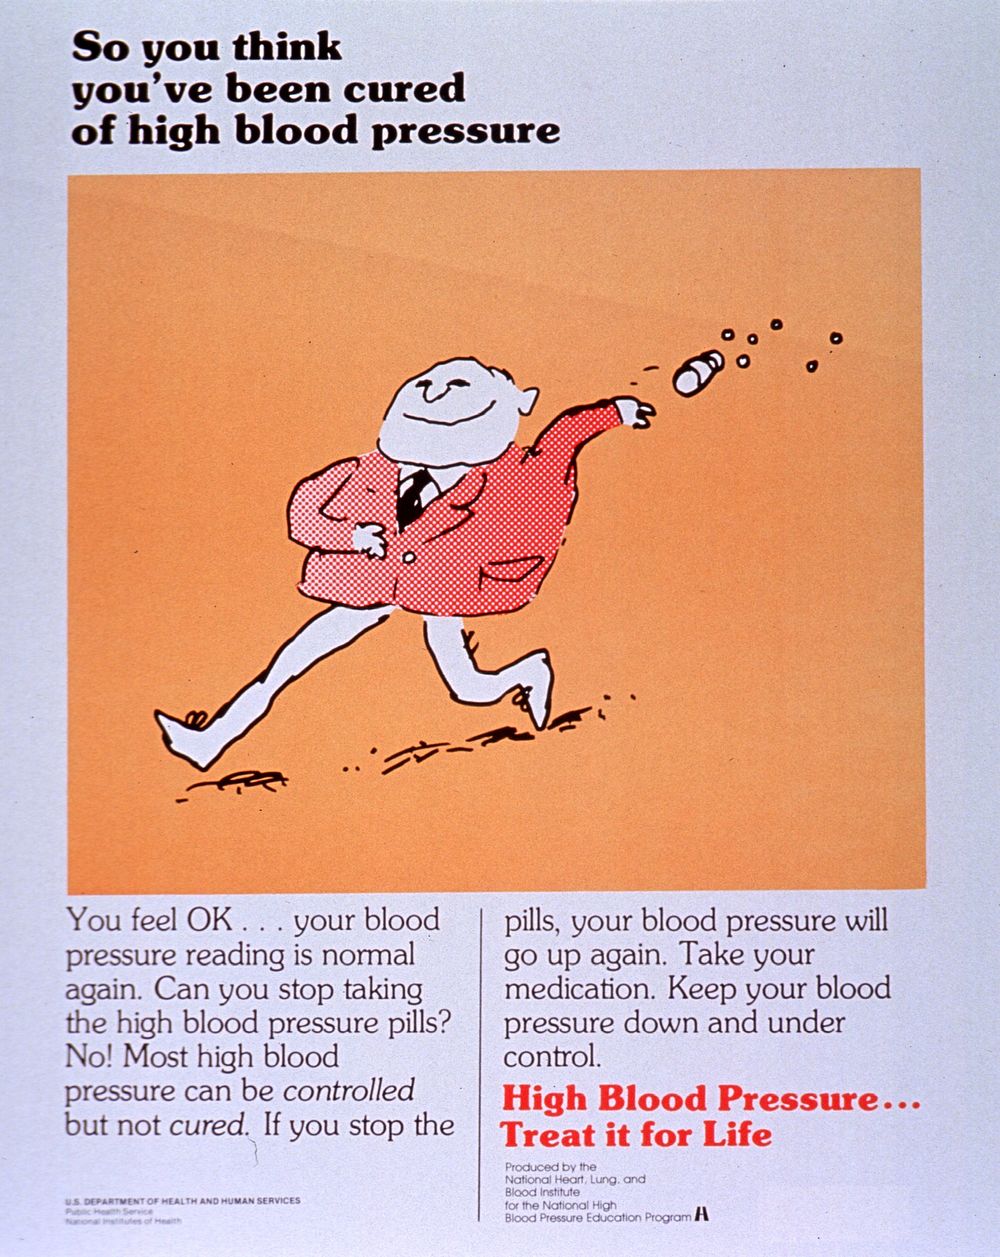 So You Think You've Been Cured of high Blood PressureCollection:Images from the History of Medicine…